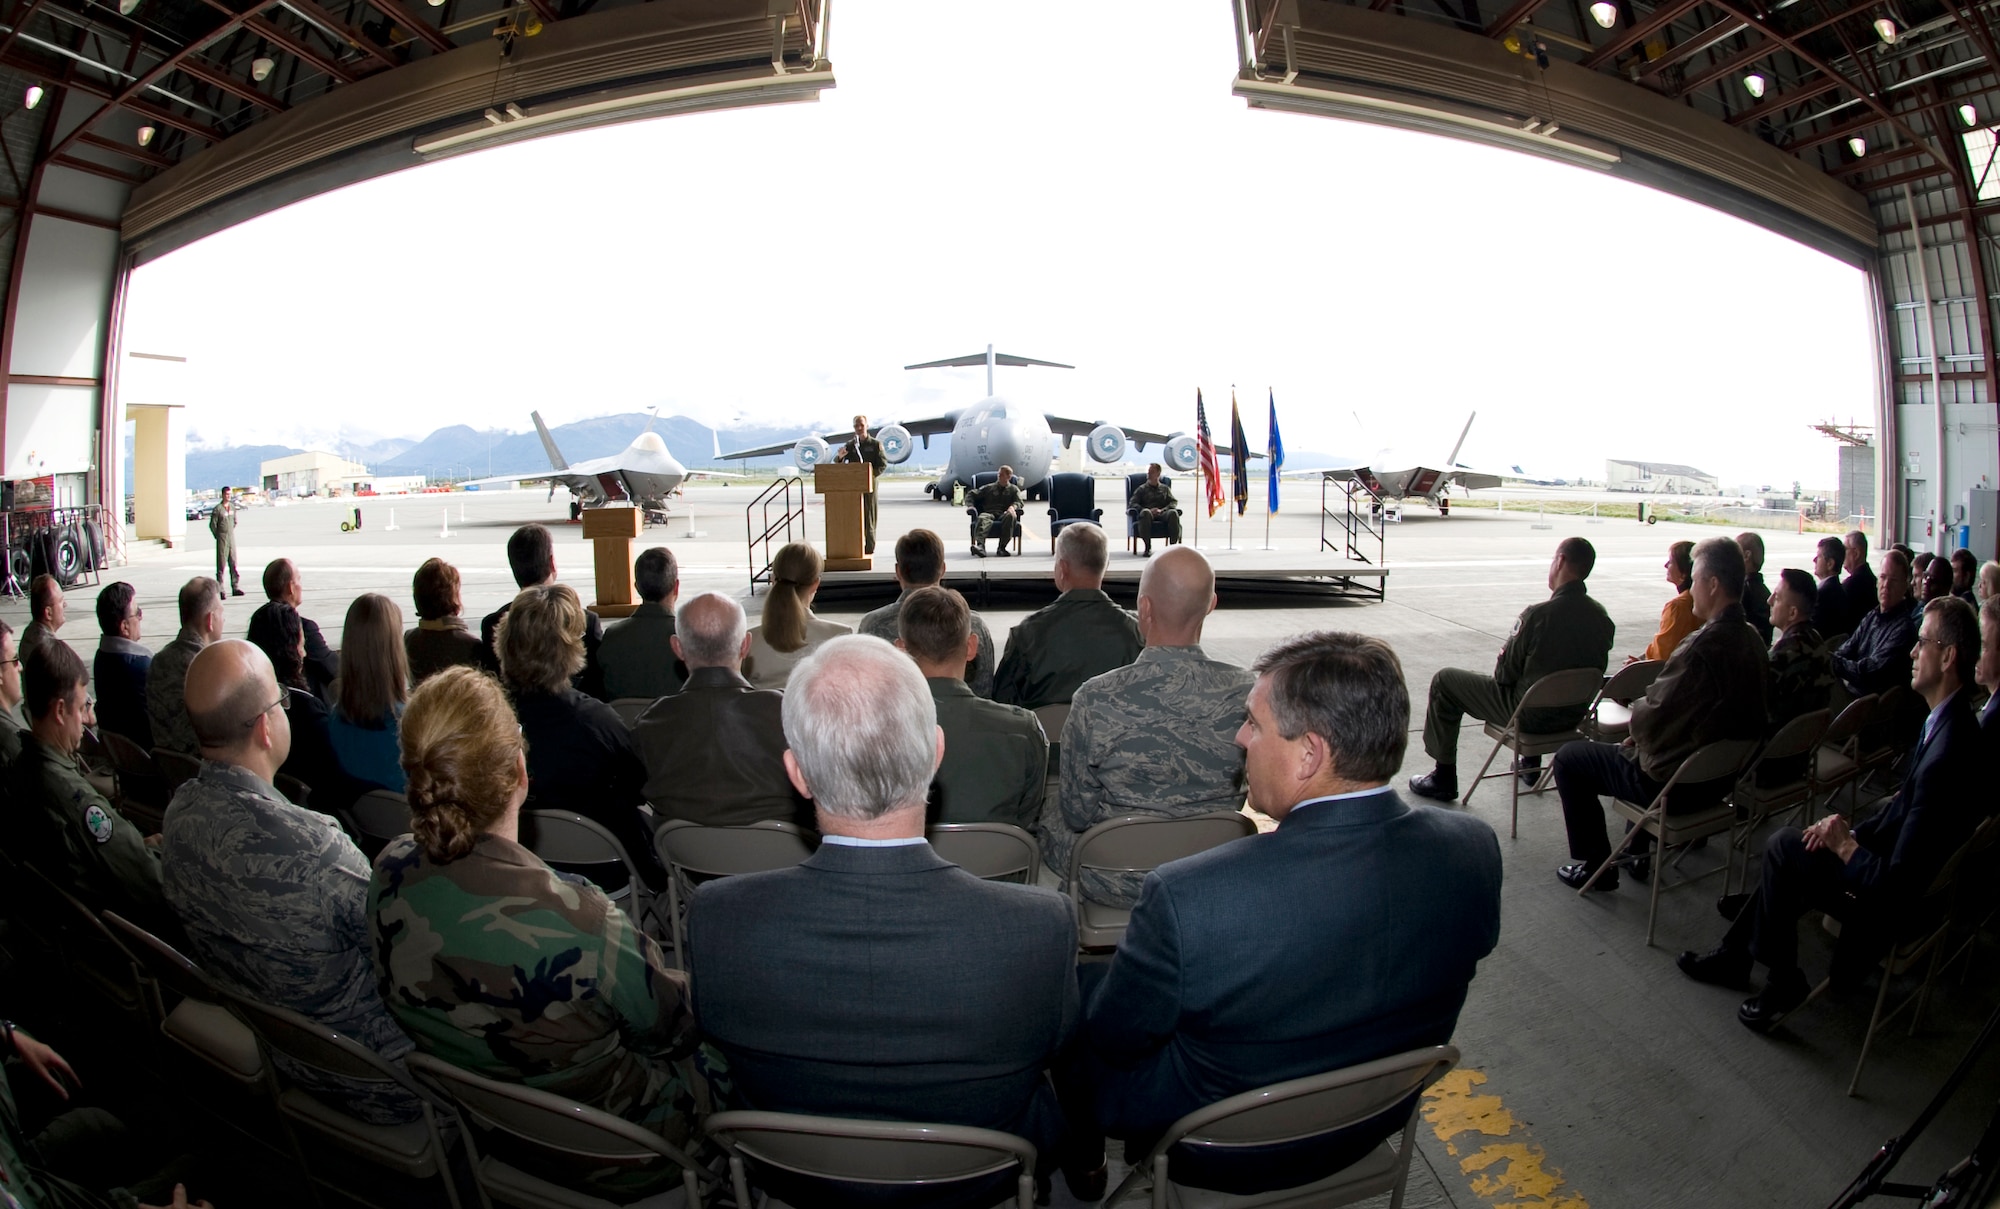 ELMENDORF AIR FORCE BASE, Alaska -- Col. Charles Foster, 176th Wing commander, speaks to the attendants of the Inital Operational Capabiltiy ceremony Sept. 5. The ceremony was held to celebrate the combat capability of the C-17 Globemaster III and the F-22A Raptor. (U.S. Air Force photo/Senior Airman Matthew Owens)